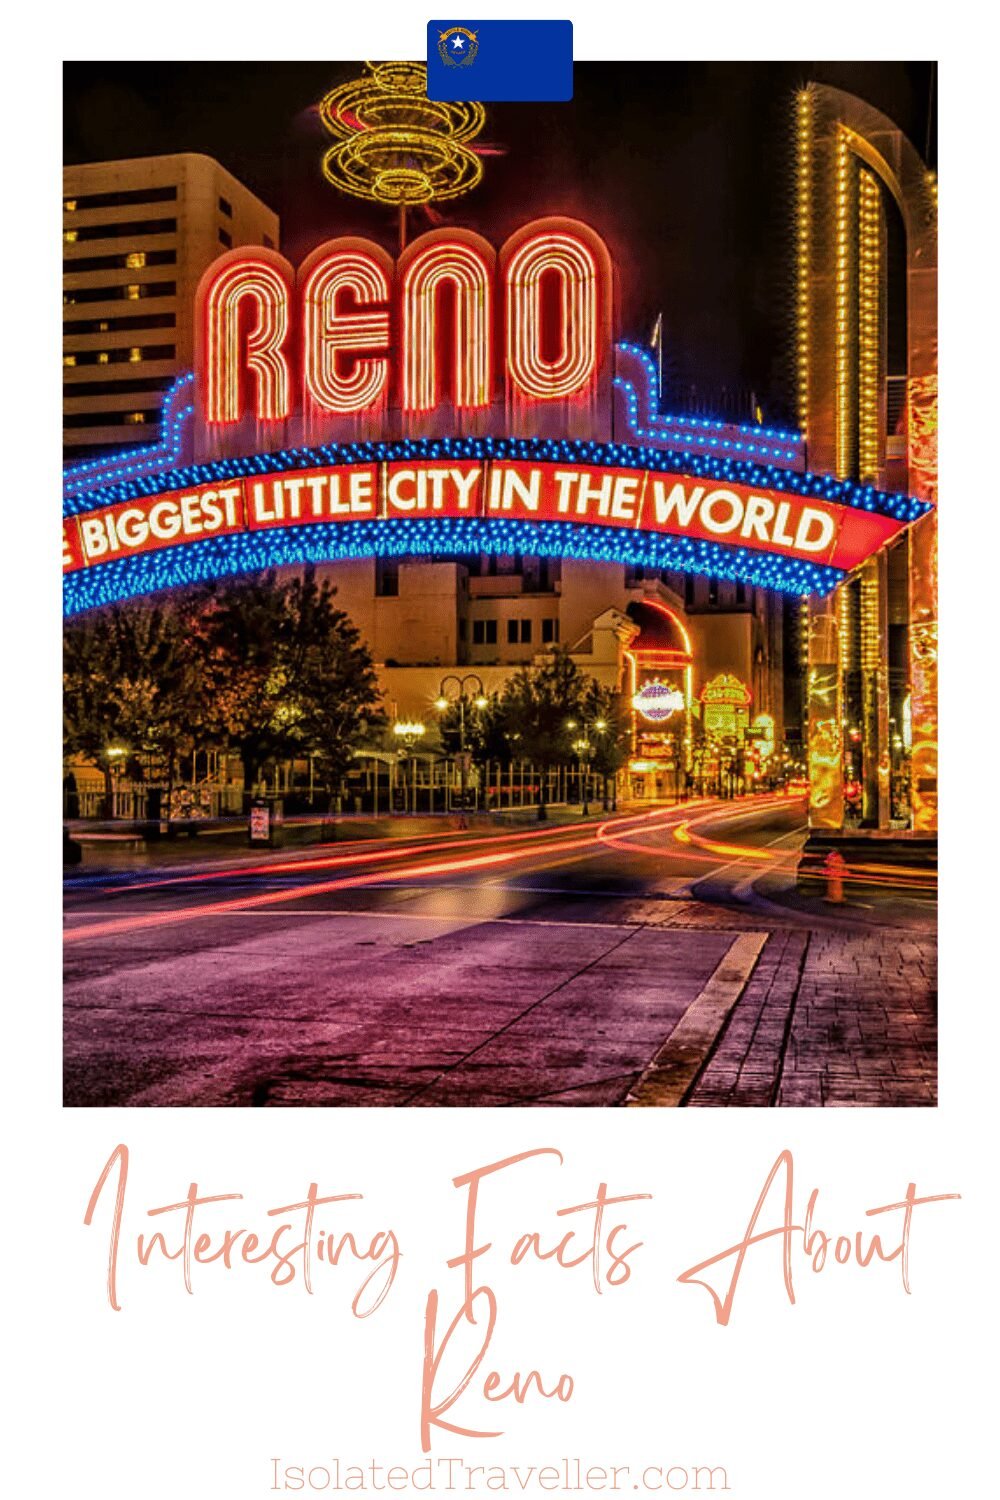 Facts About Reno